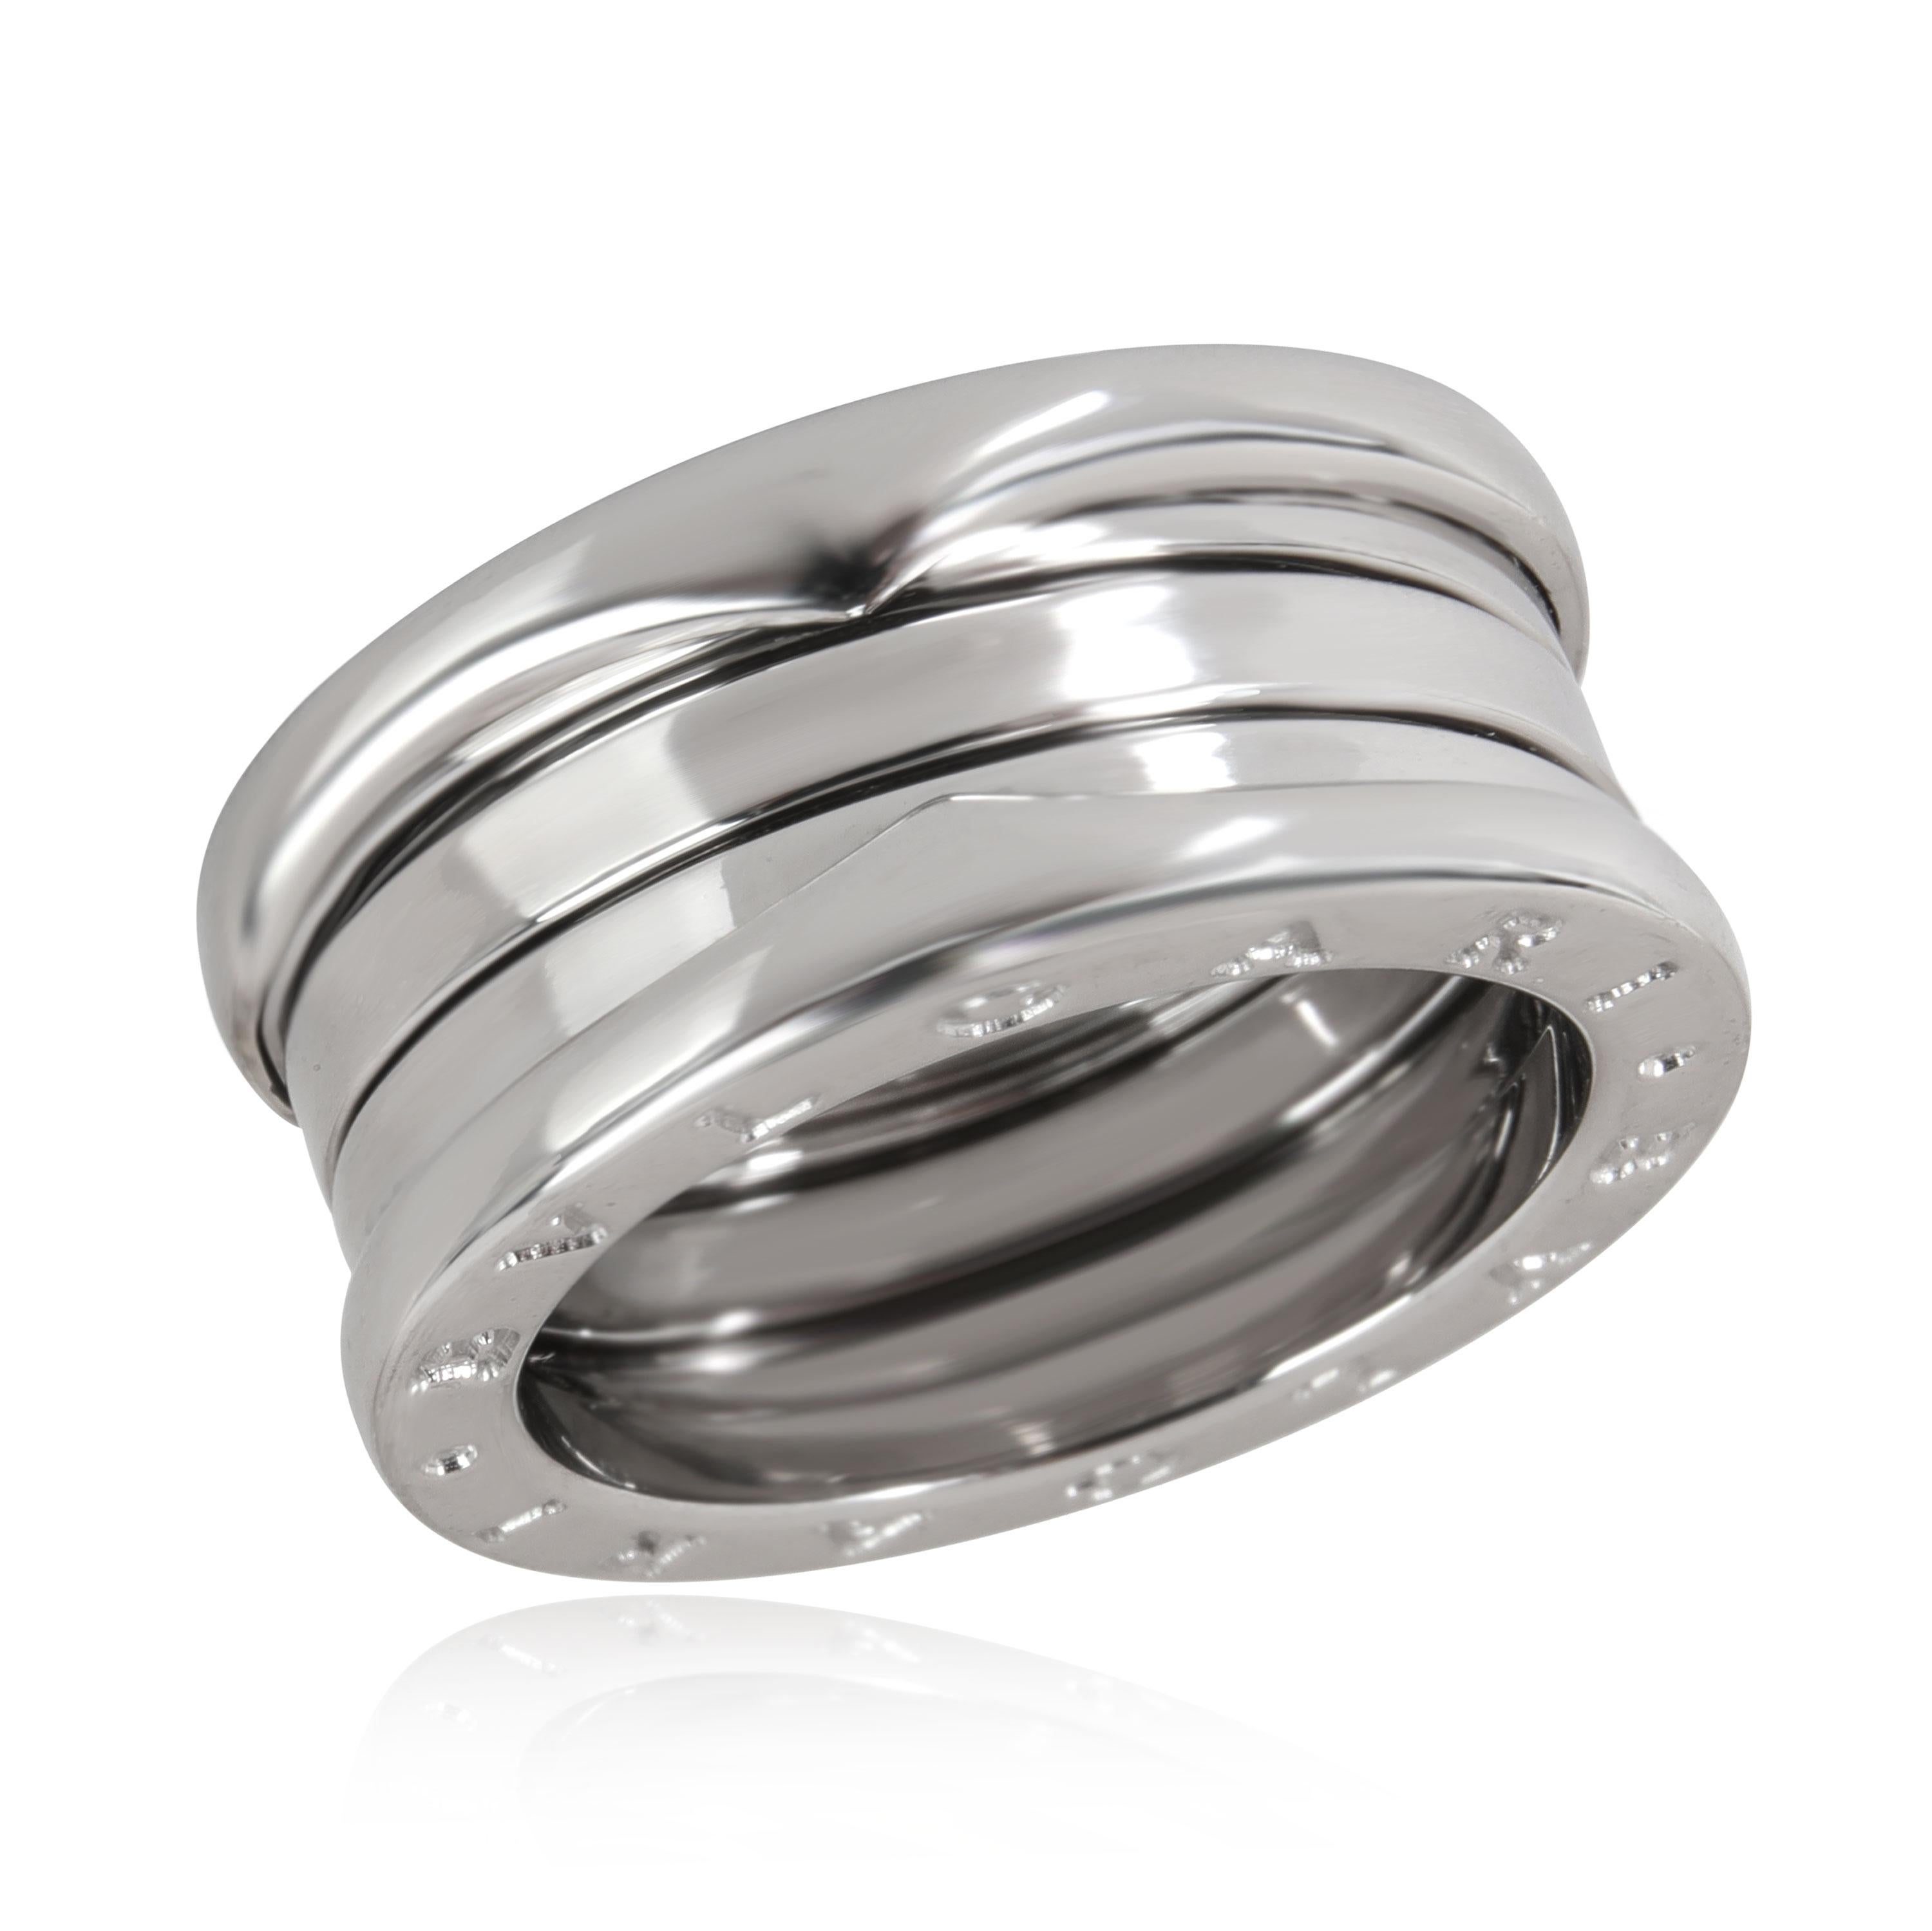 Bulgari B.Zero1 3 Band Ring in 18kt White Gold

PRIMARY DETAILS
SKU: 114035
Listing Title: Bulgari B.Zero1 3 Band Ring in 18kt White Gold
Condition Description: Retails for 2330 USD. In excellent condition and recently polished. Ring size is